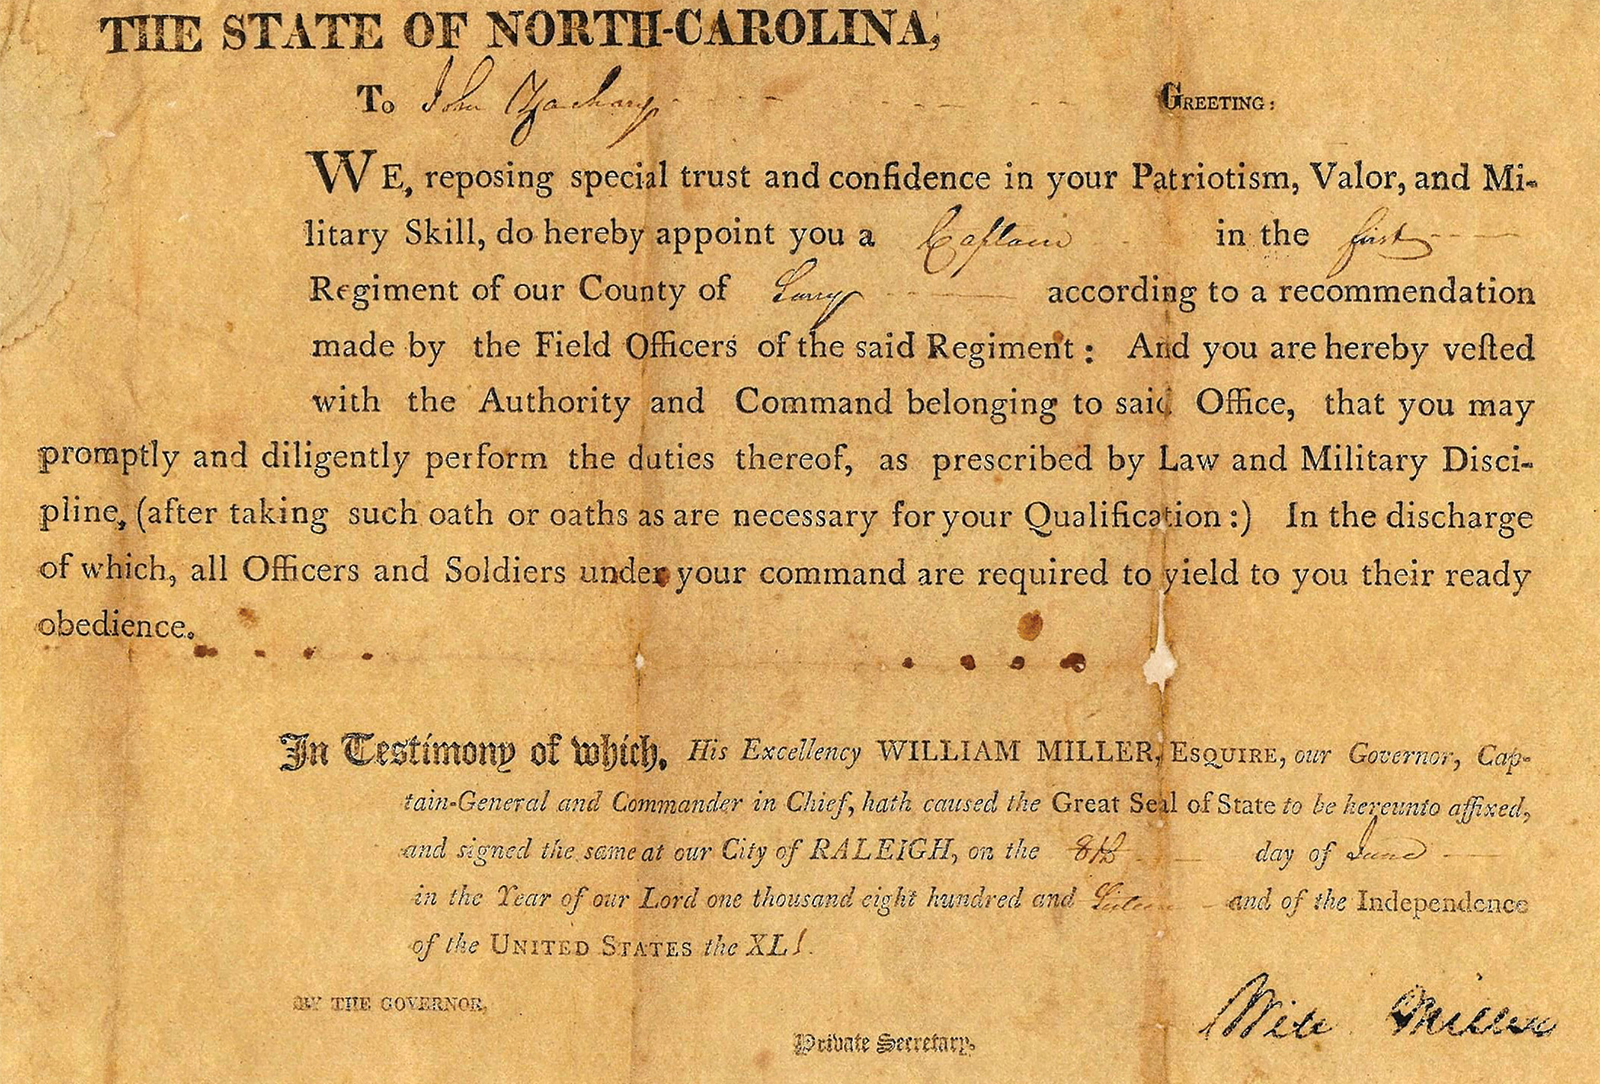 1816-certificate-of-promotion-for-John-Zachary-Surry-NC-Militia